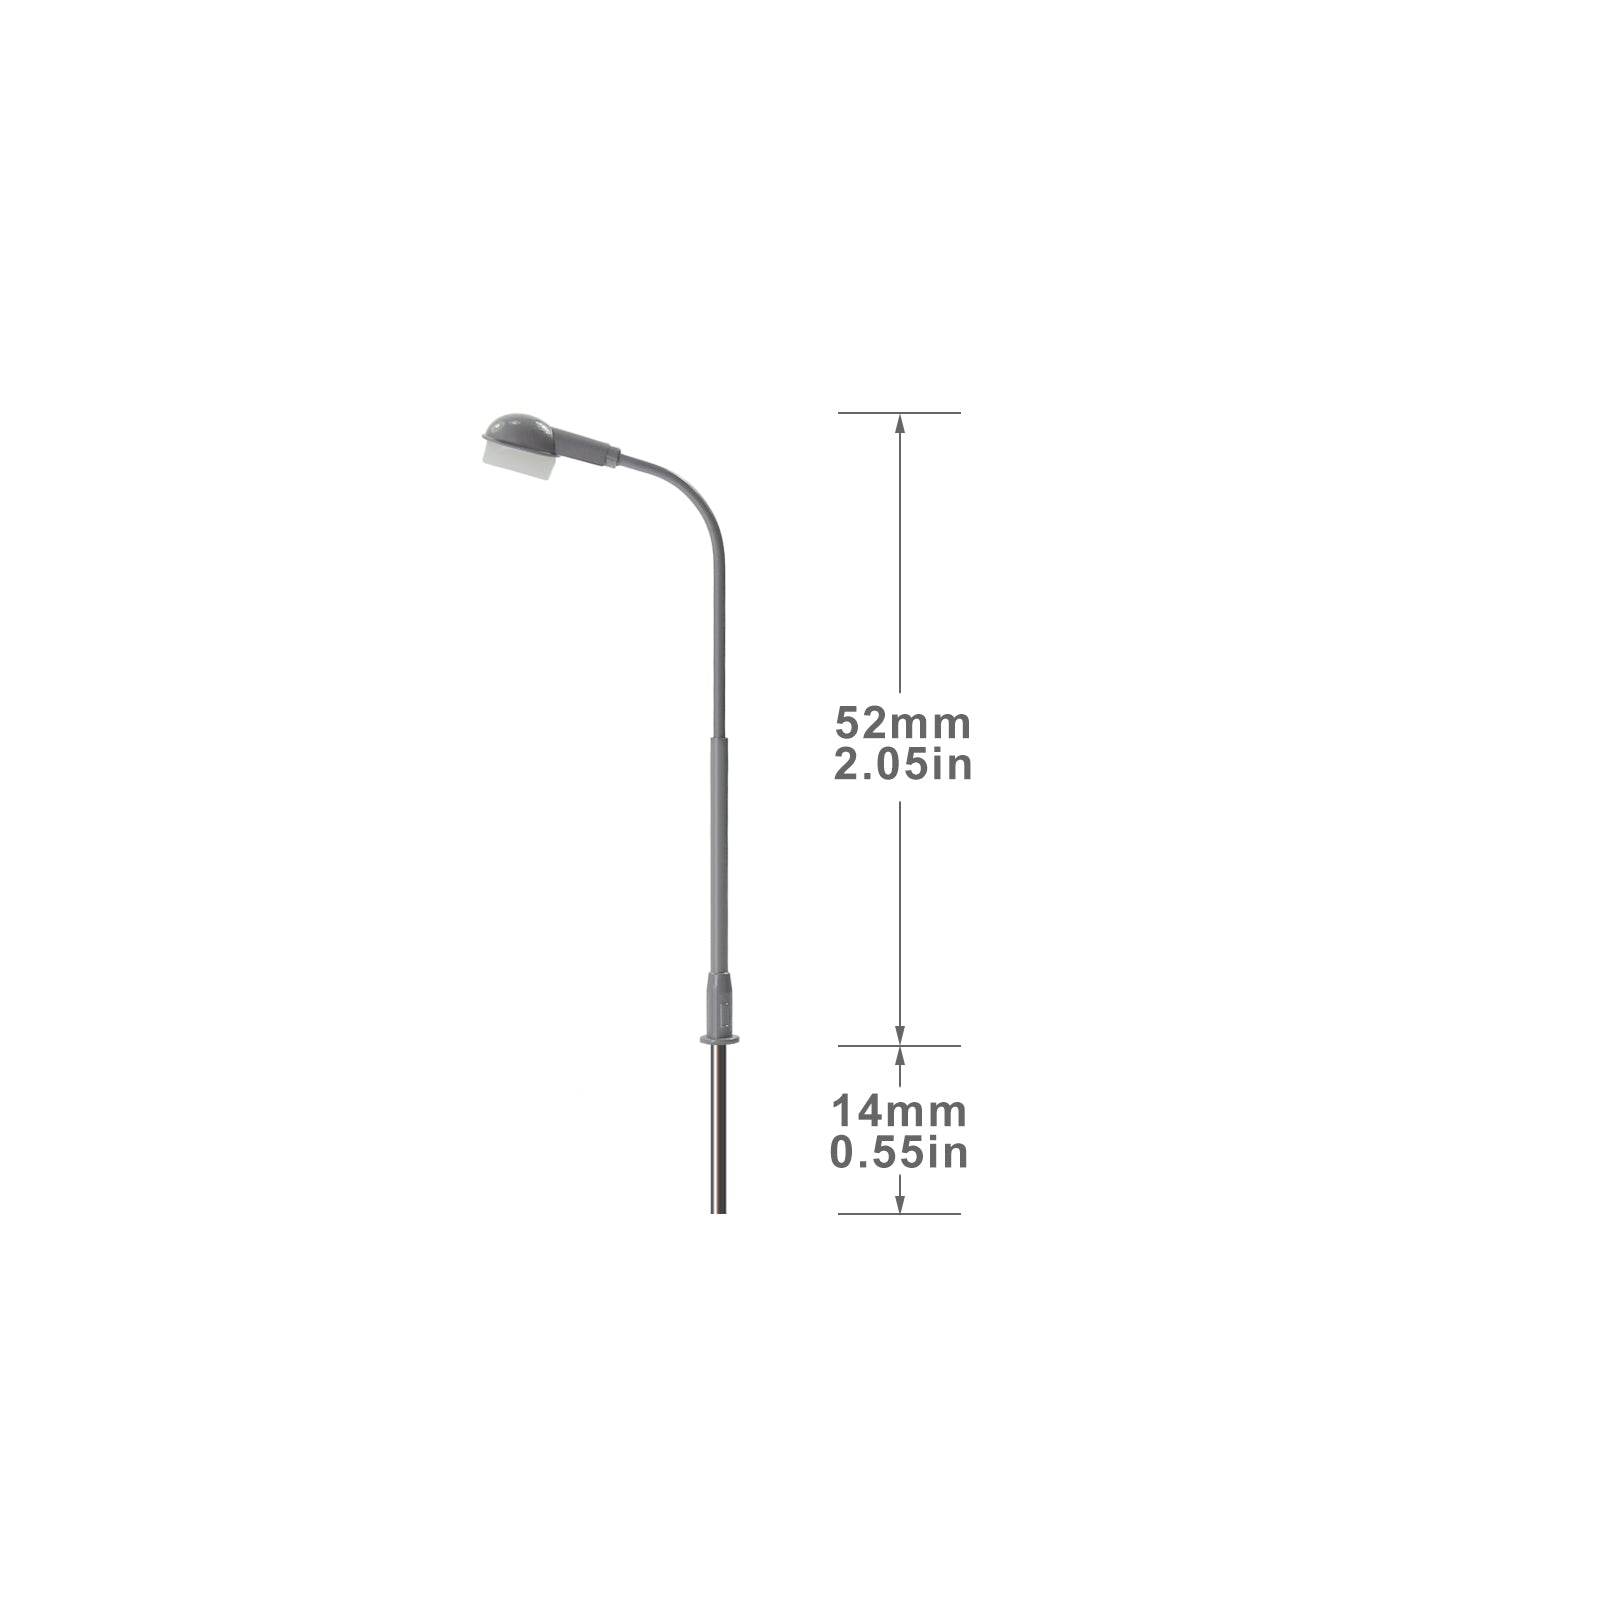 LD10 5pcs Metal Street Light Lamps with Cover LEDs